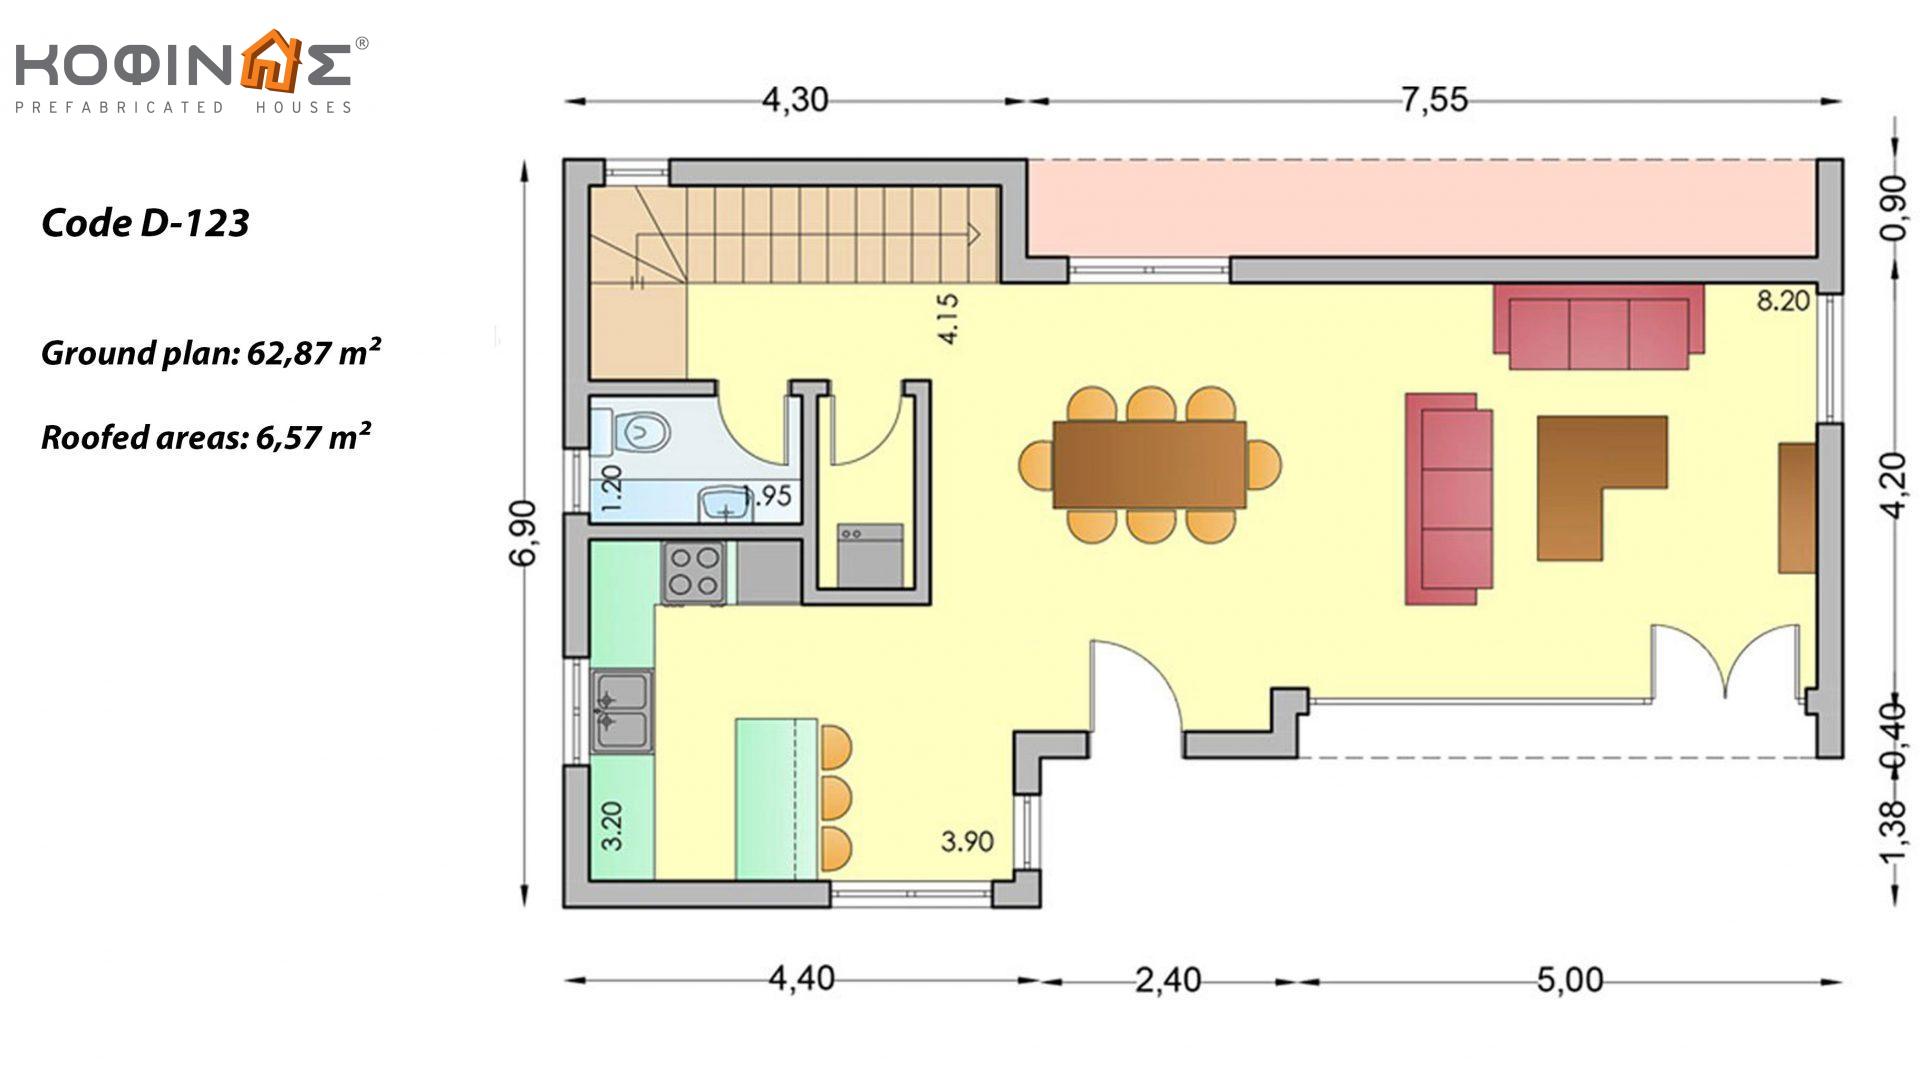 2-story house D-123, total surface of 123,30 m² ,covered roofed areas 11,42 m²,balconies 6,07 m²